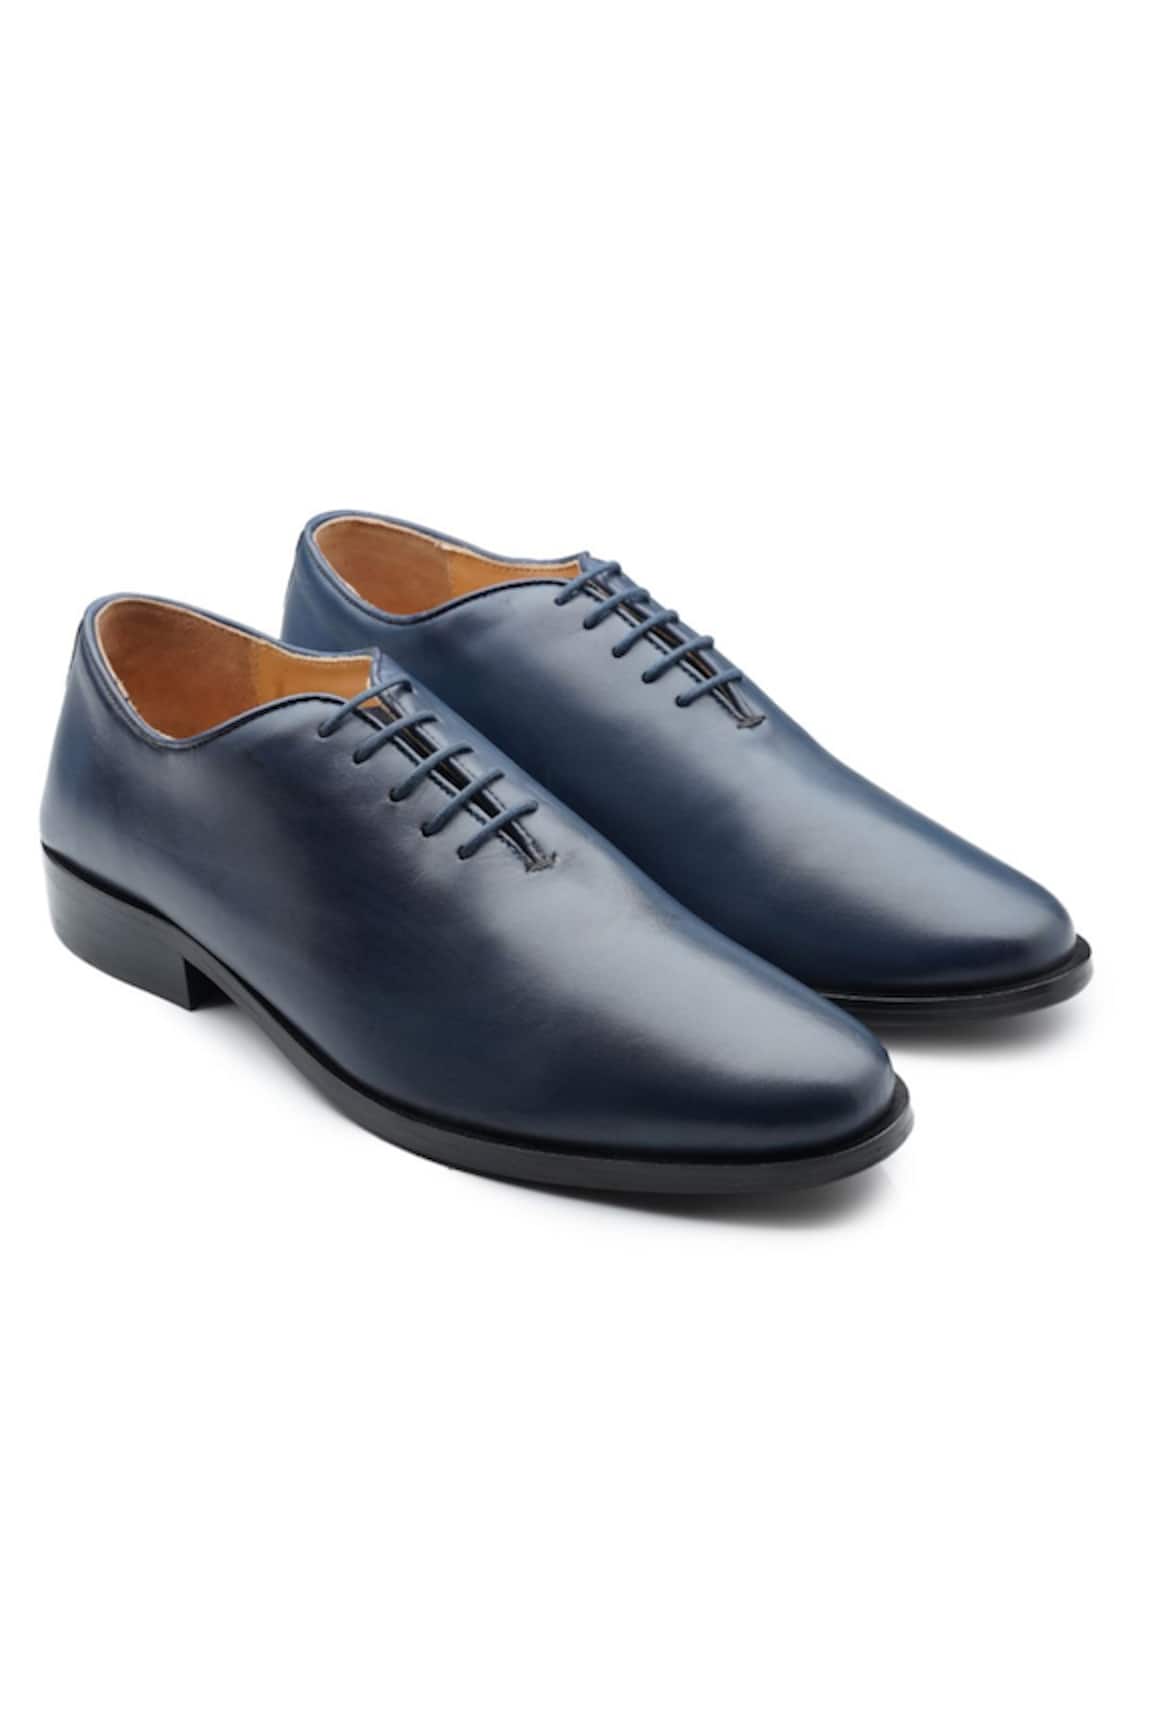 Rapawalk Handcrafted Oxford Shoes